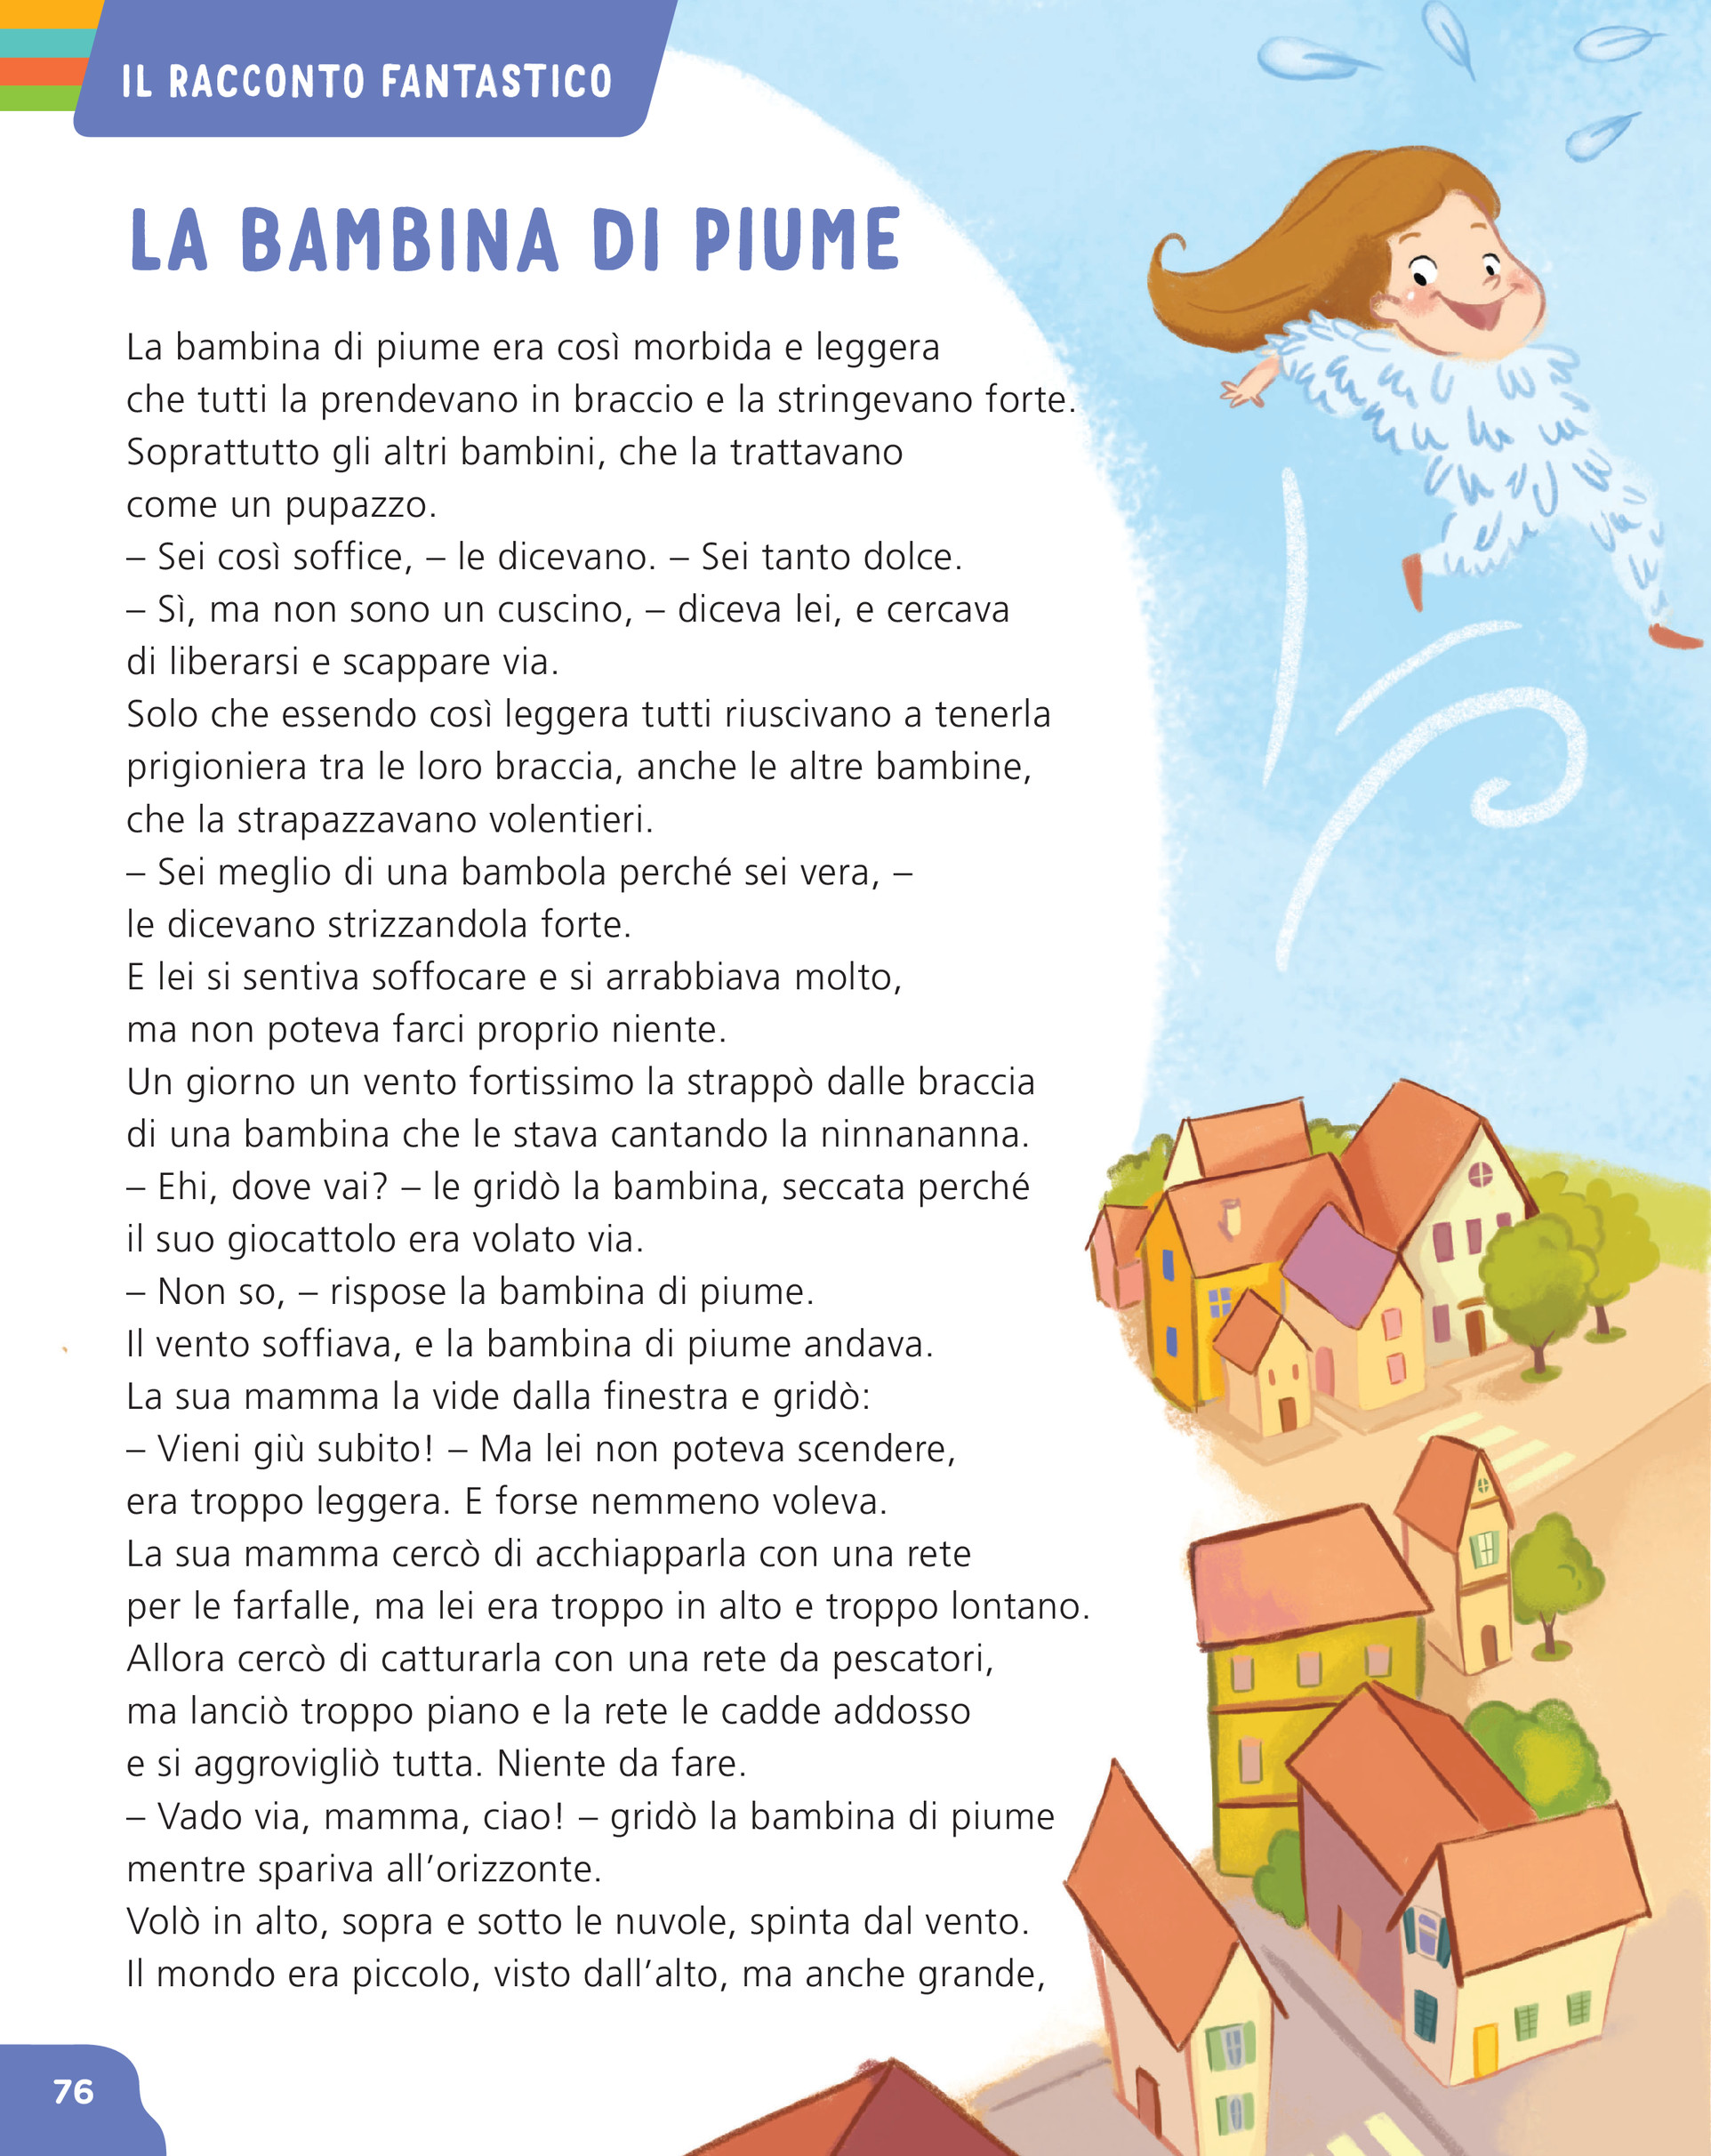 https://static.dbookeasy.giuntiscuola.it/progetti/progetto_16/book_199/pages/76.png